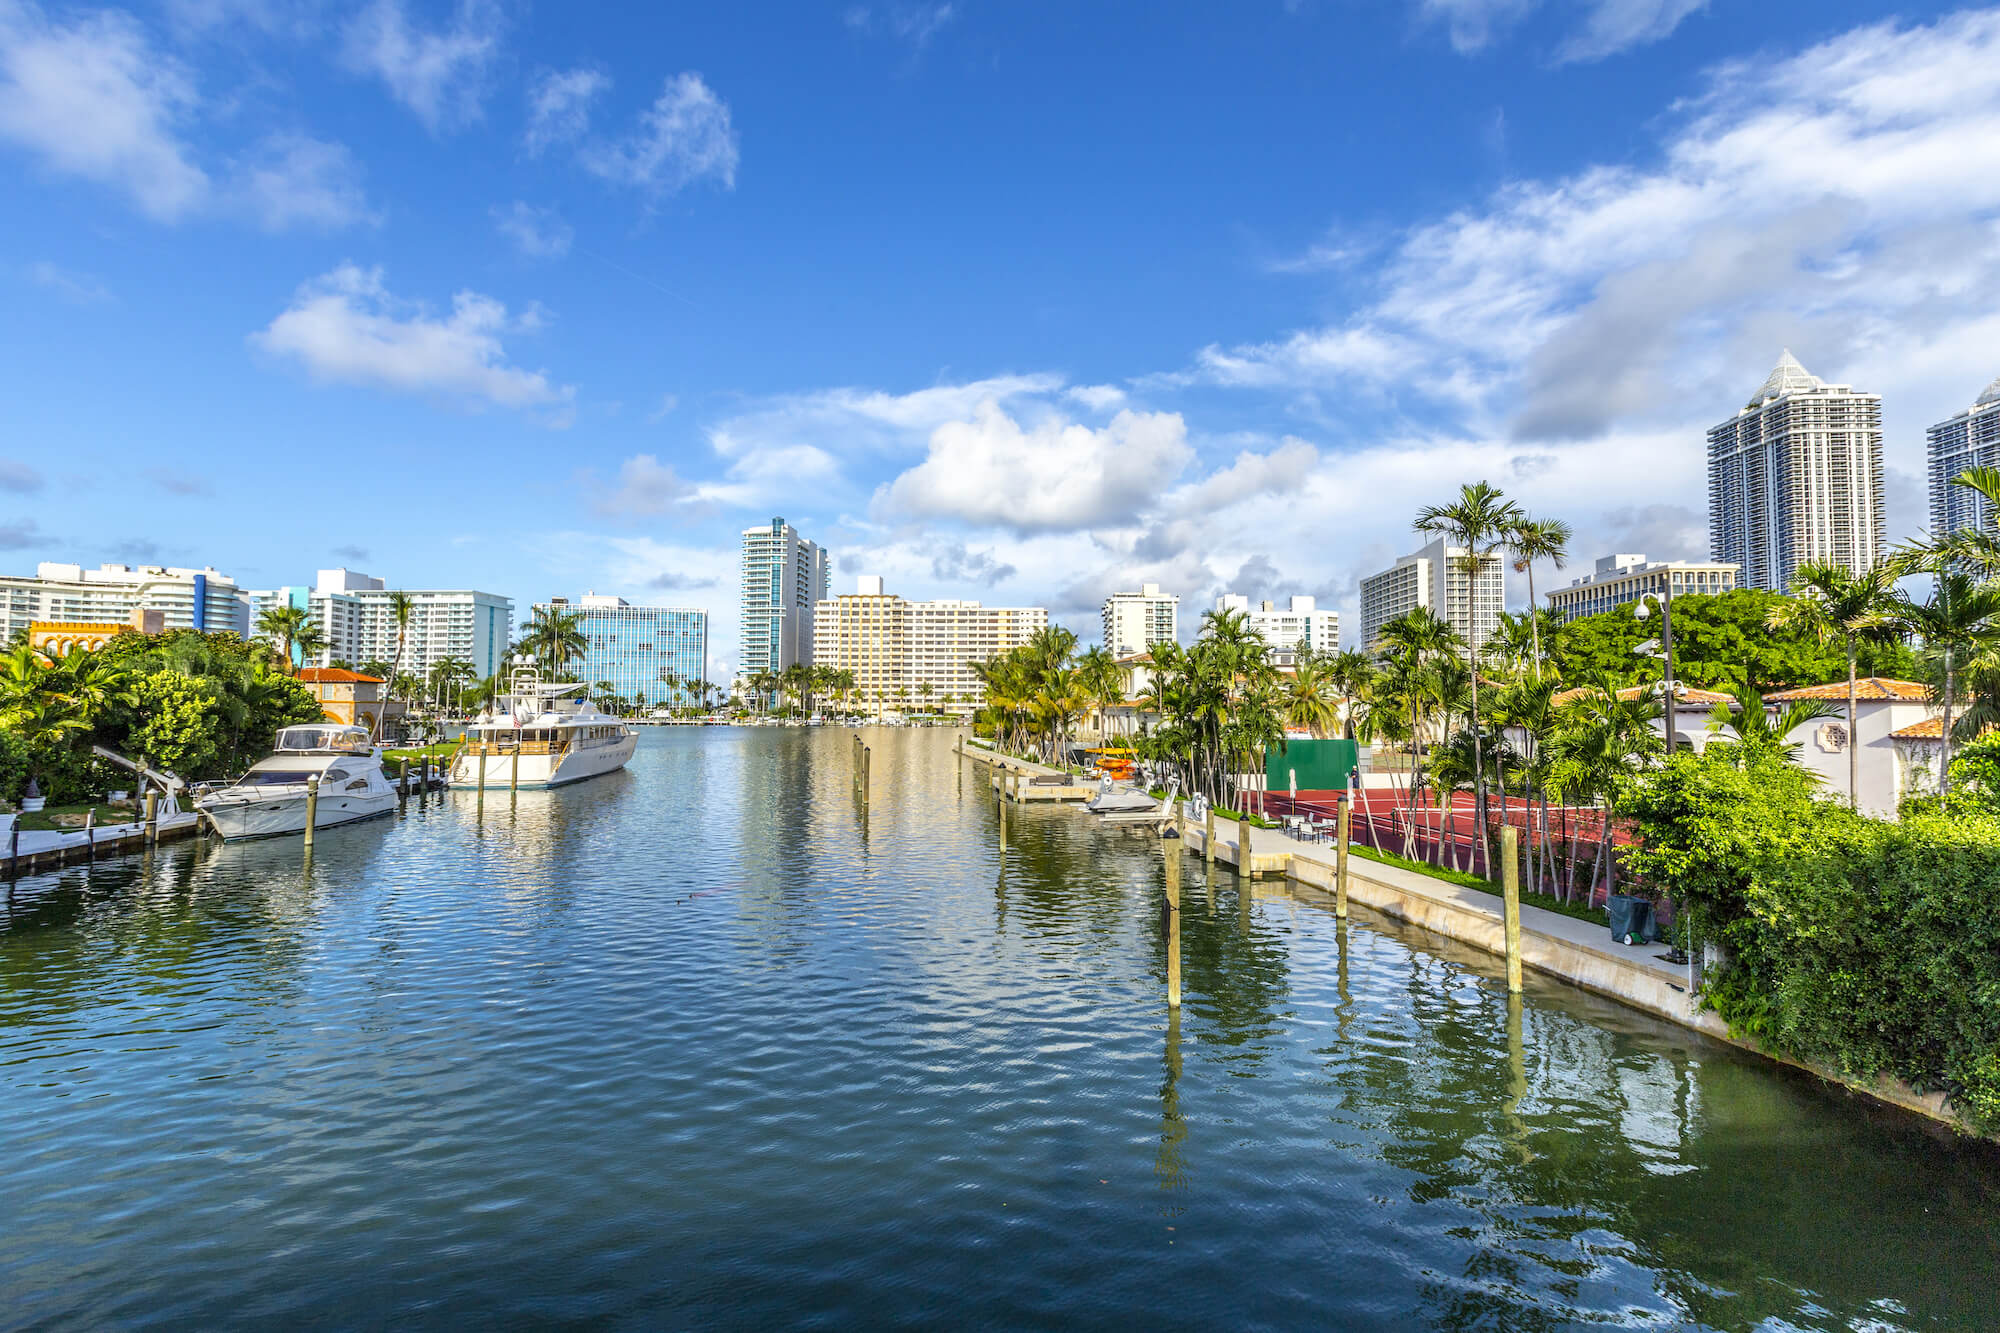 Homes with boats in Ft. Lauderdale